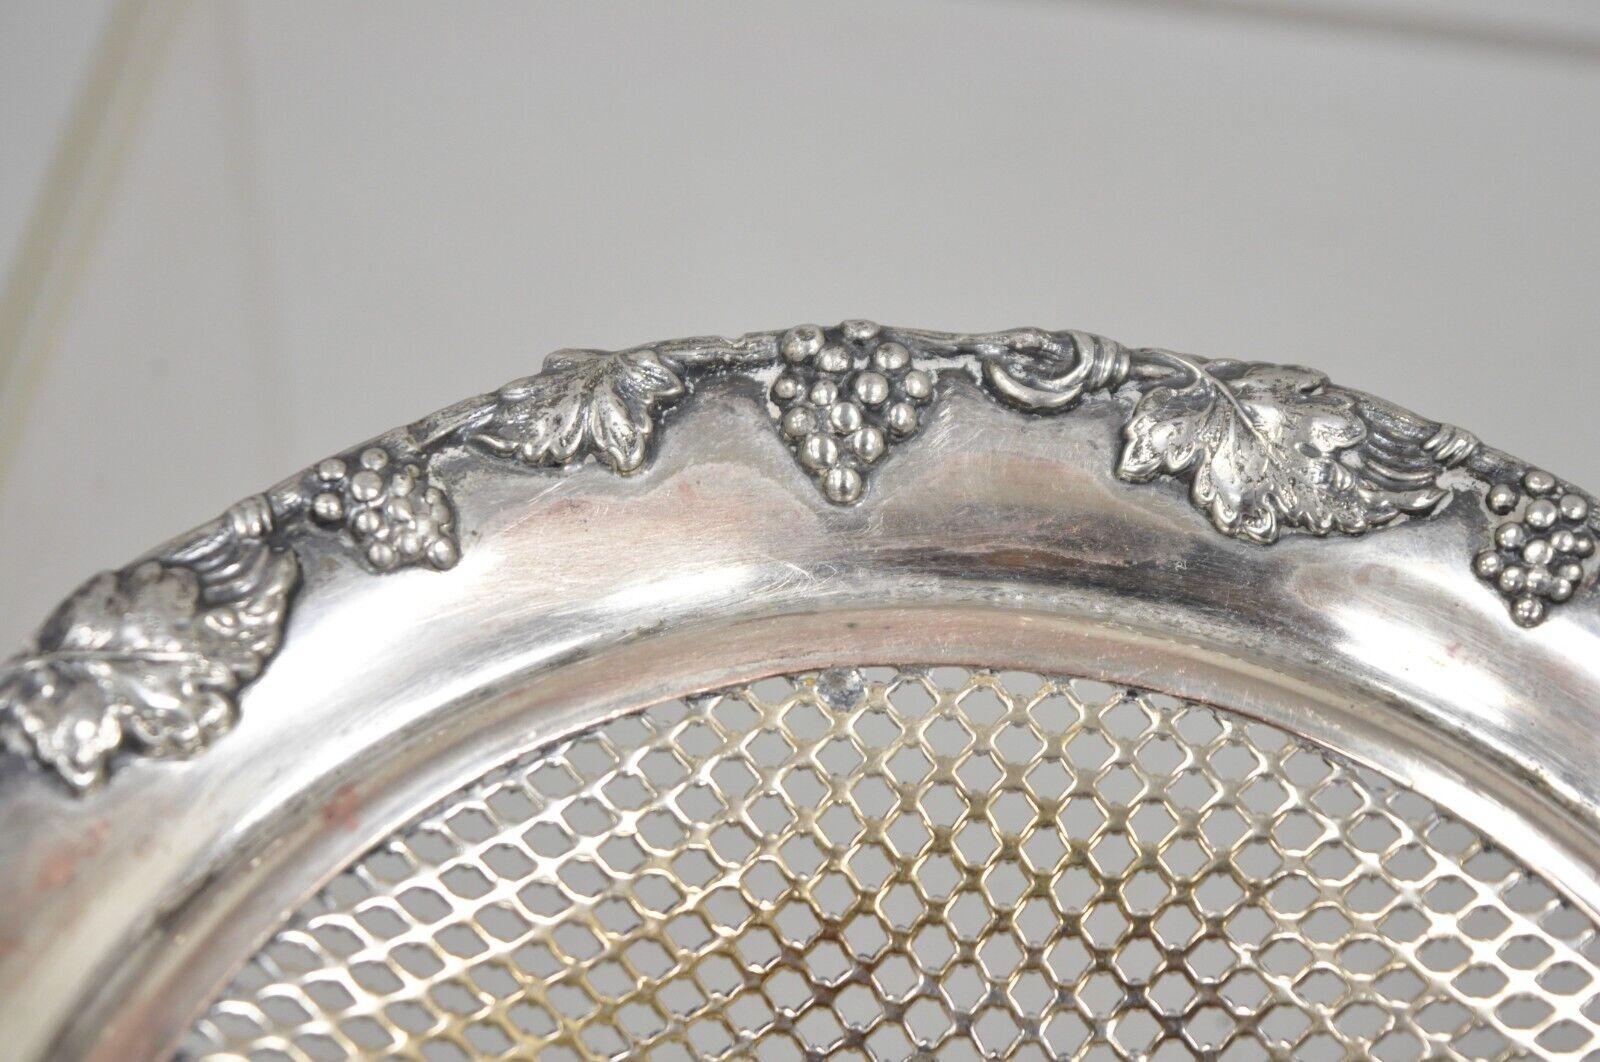 English Edwardian Silver Plated Wreath Design Small Mesh Basket Candy Dish -Pair For Sale 1